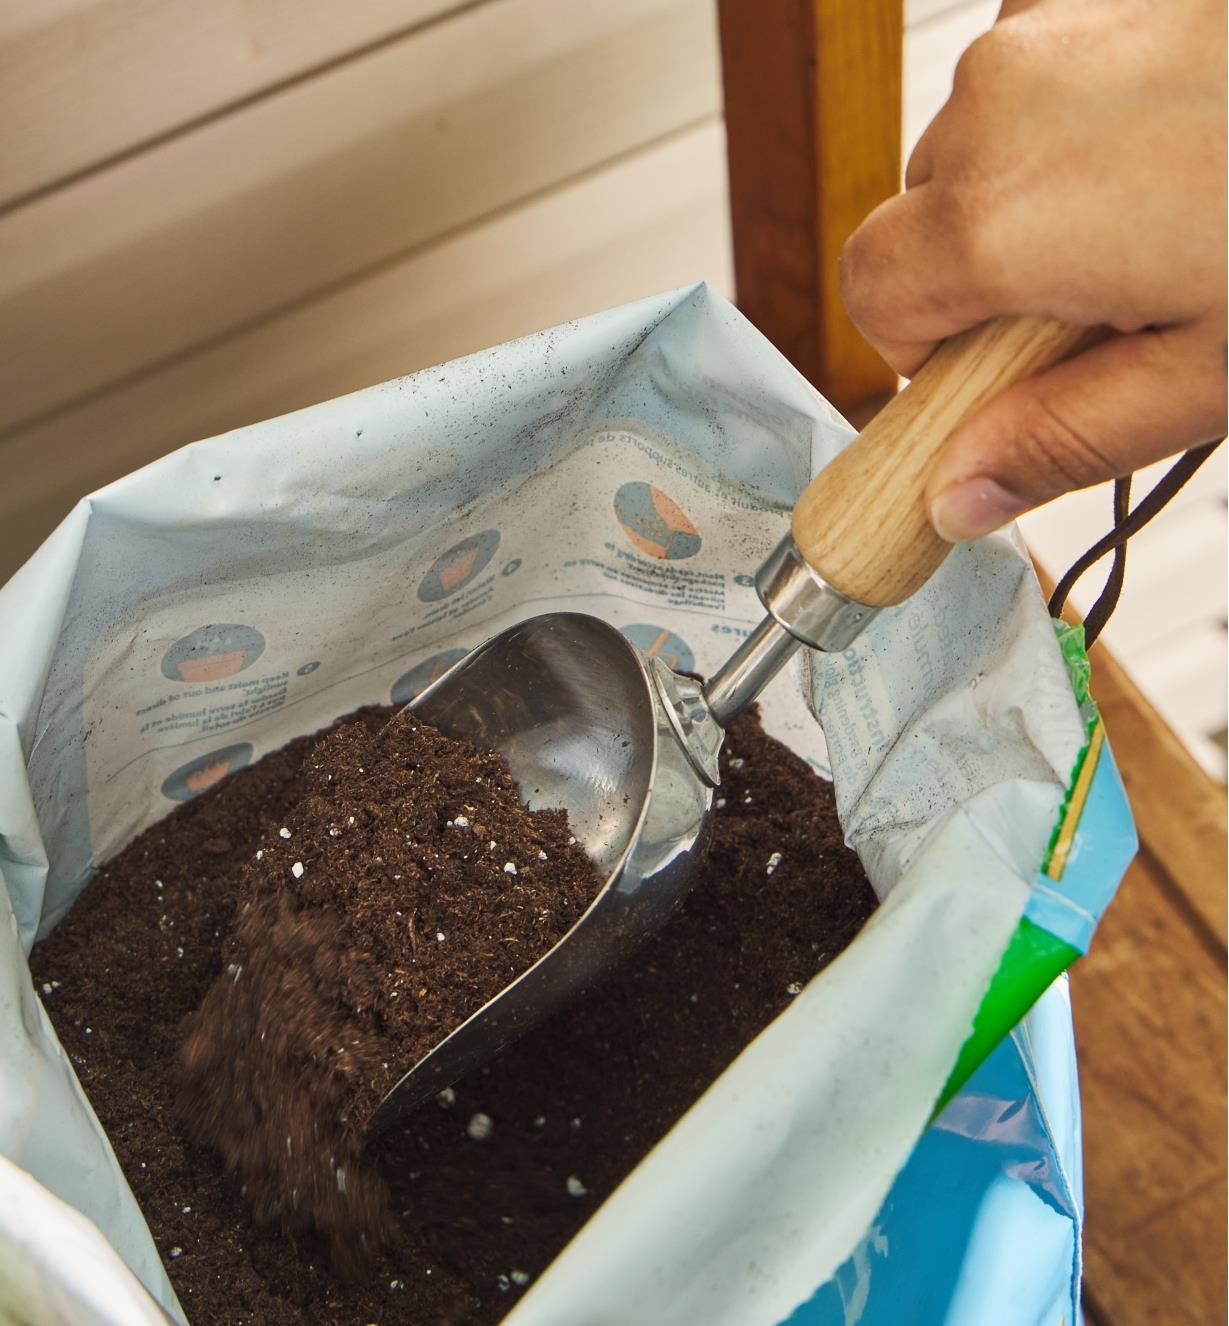 Using a stainless-steel scoop to dig into a bag of soil